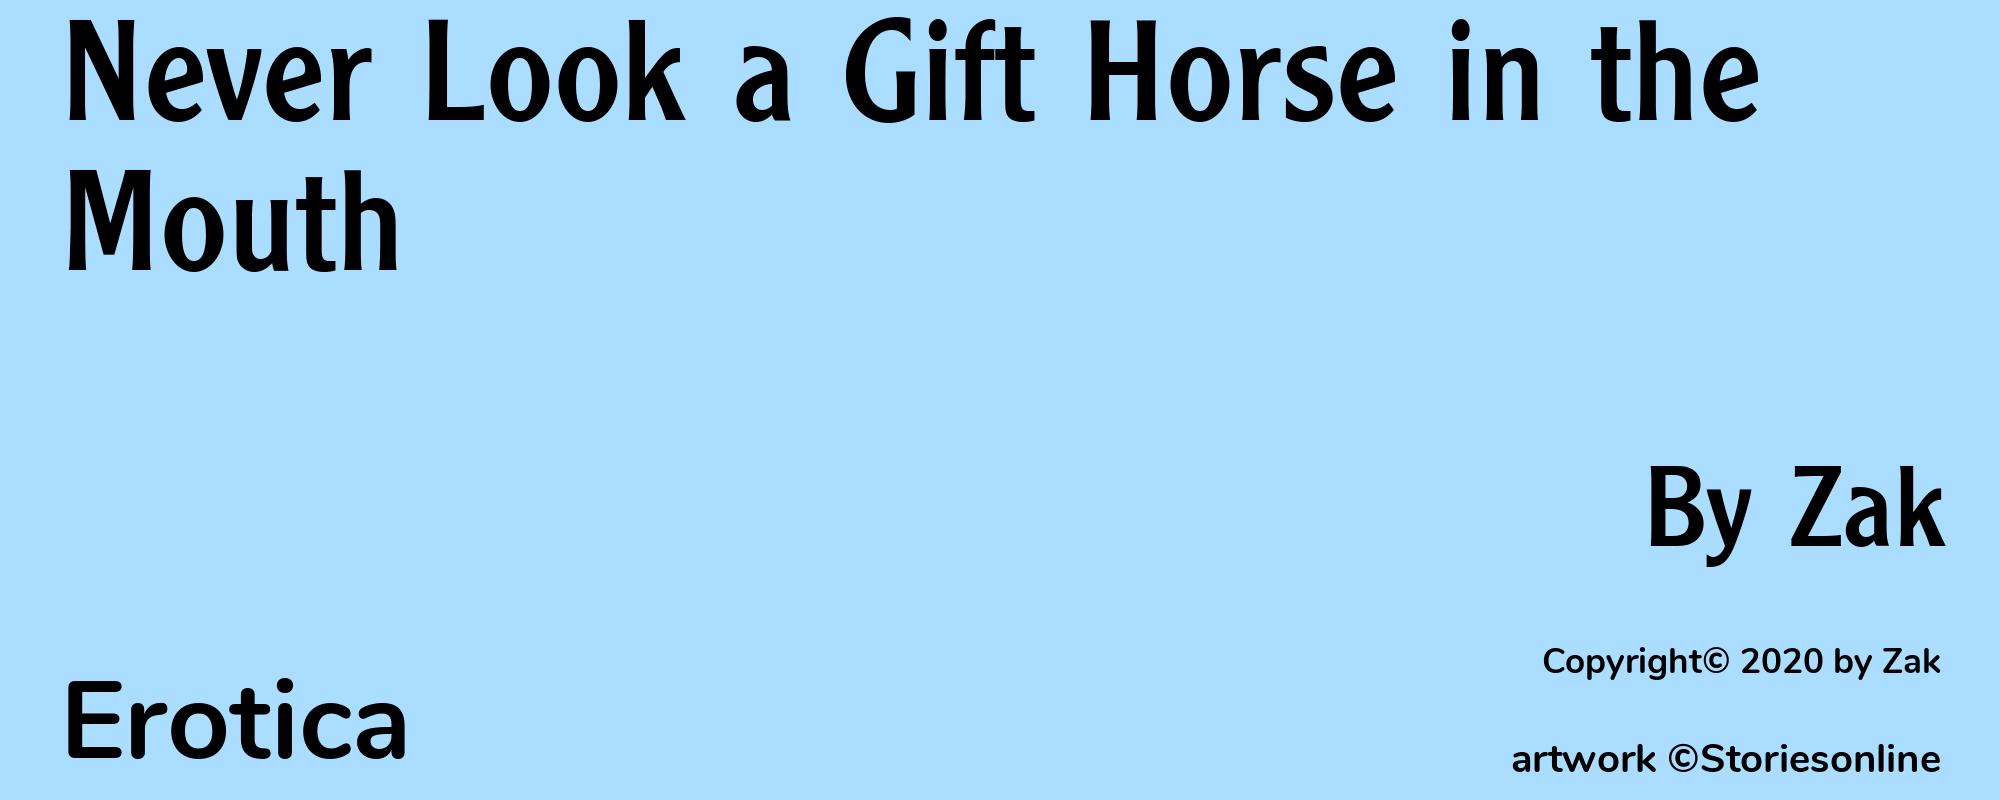 Never Look a Gift Horse in the Mouth - Cover